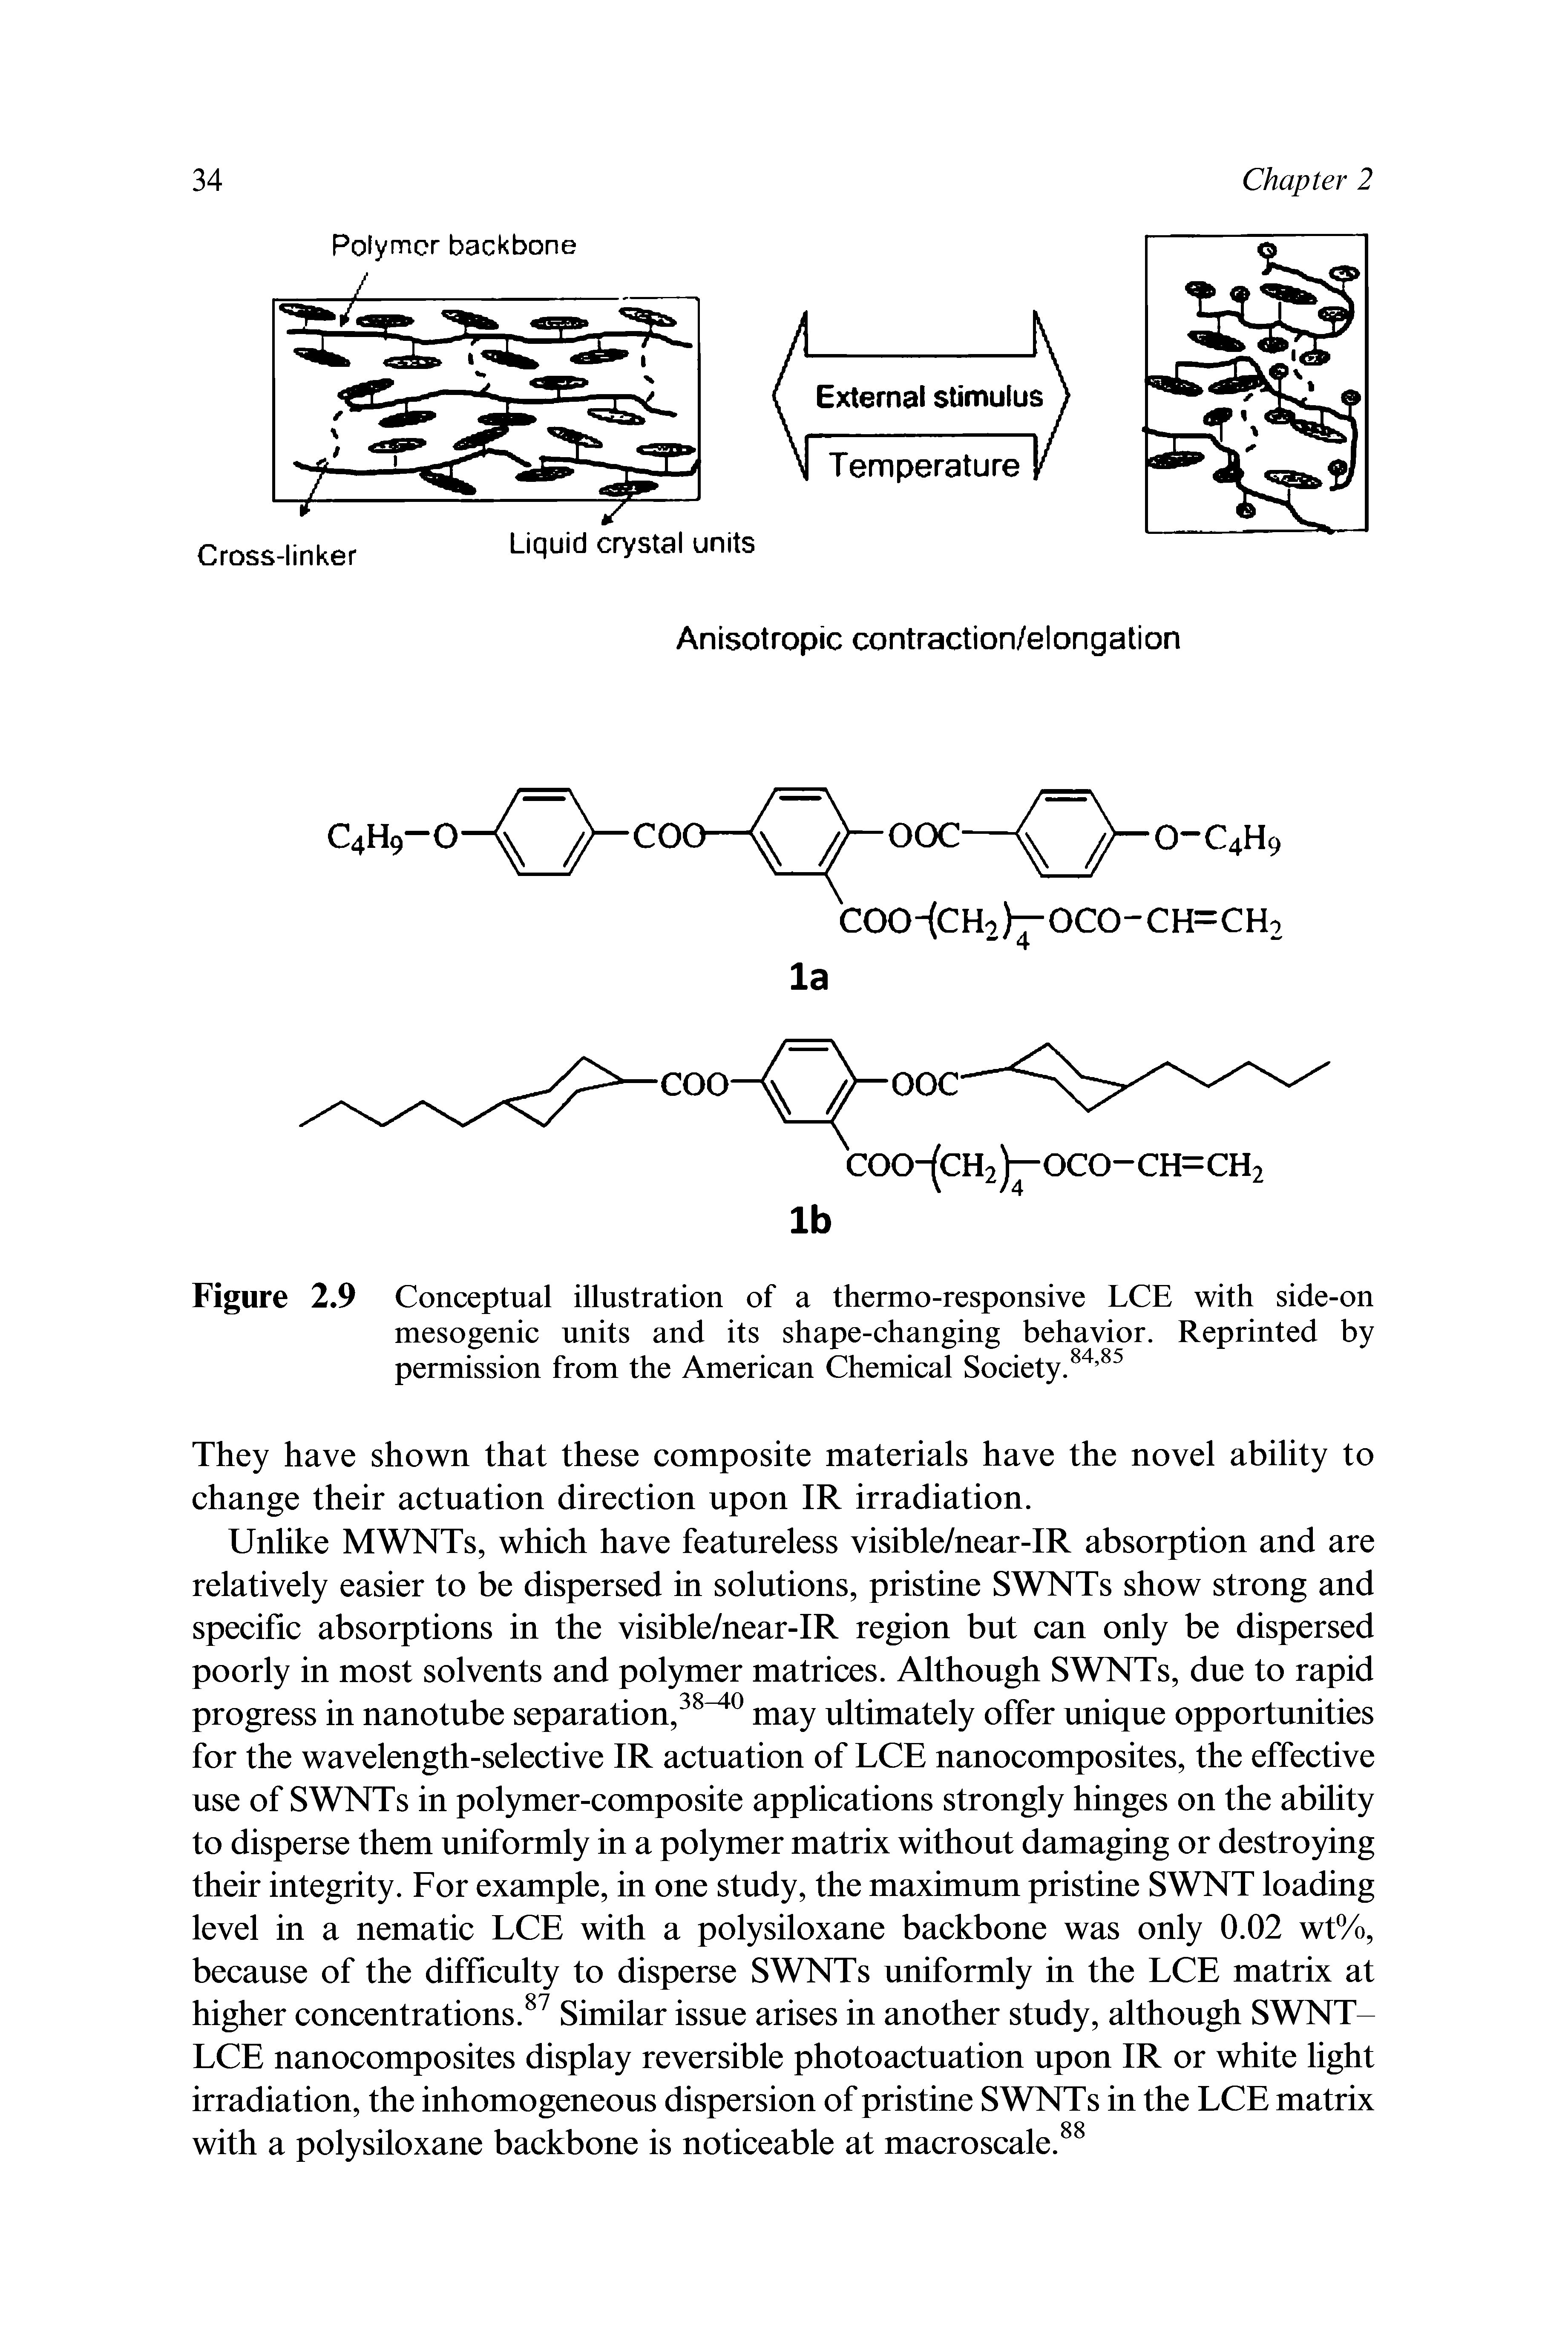 Figure 2.9 Conceptual illustration of a thermo-responsive LCE with side-on mesogenic units and its shape-changing behavior. Reprinted by permission from the American Chemical Society.